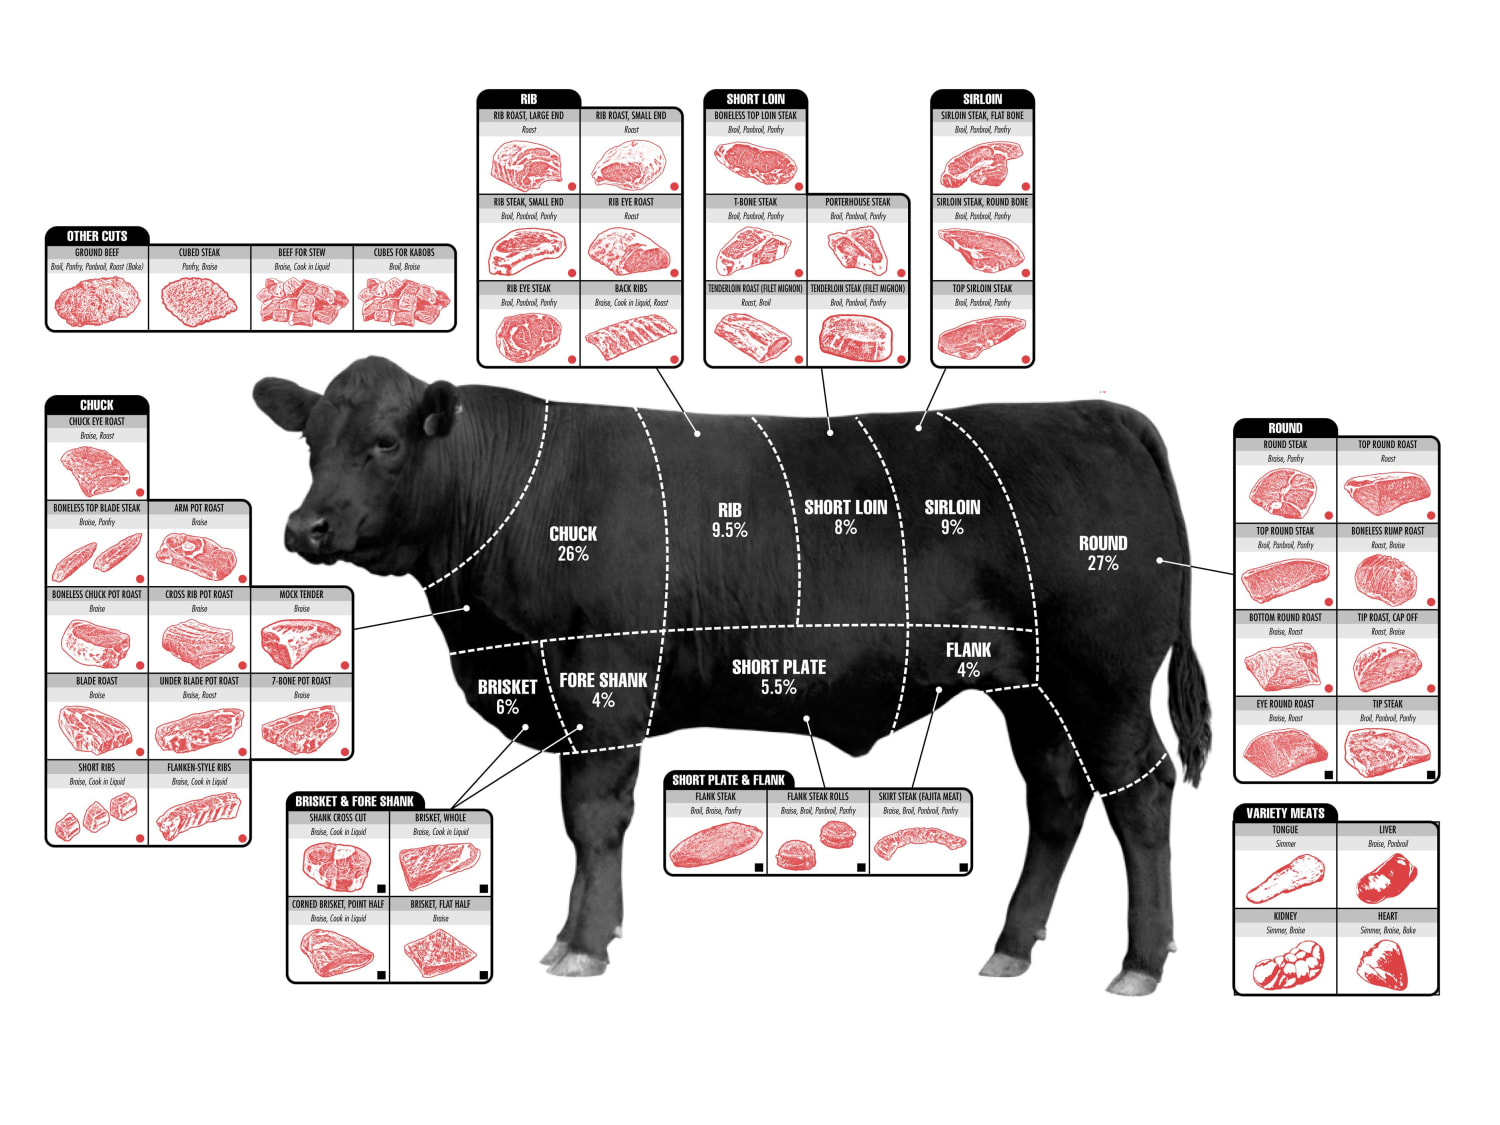 Bovine Breakdown, a guide to your cuts of cattle.